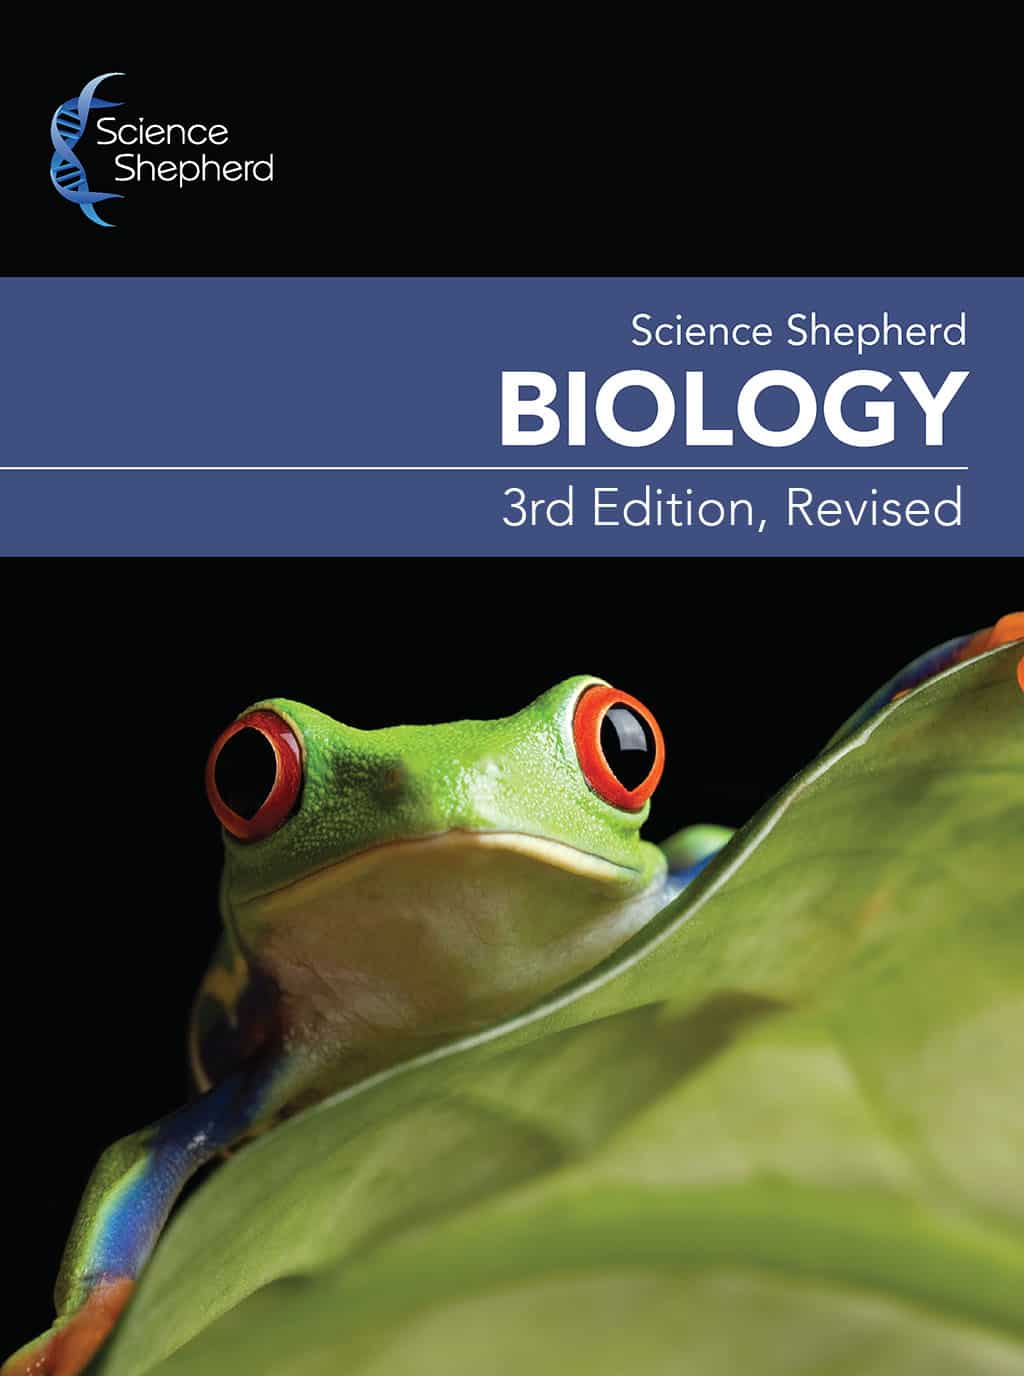 Homeschool Biology Textbook 3rd Edition Revised cover of a frog on a green leaf